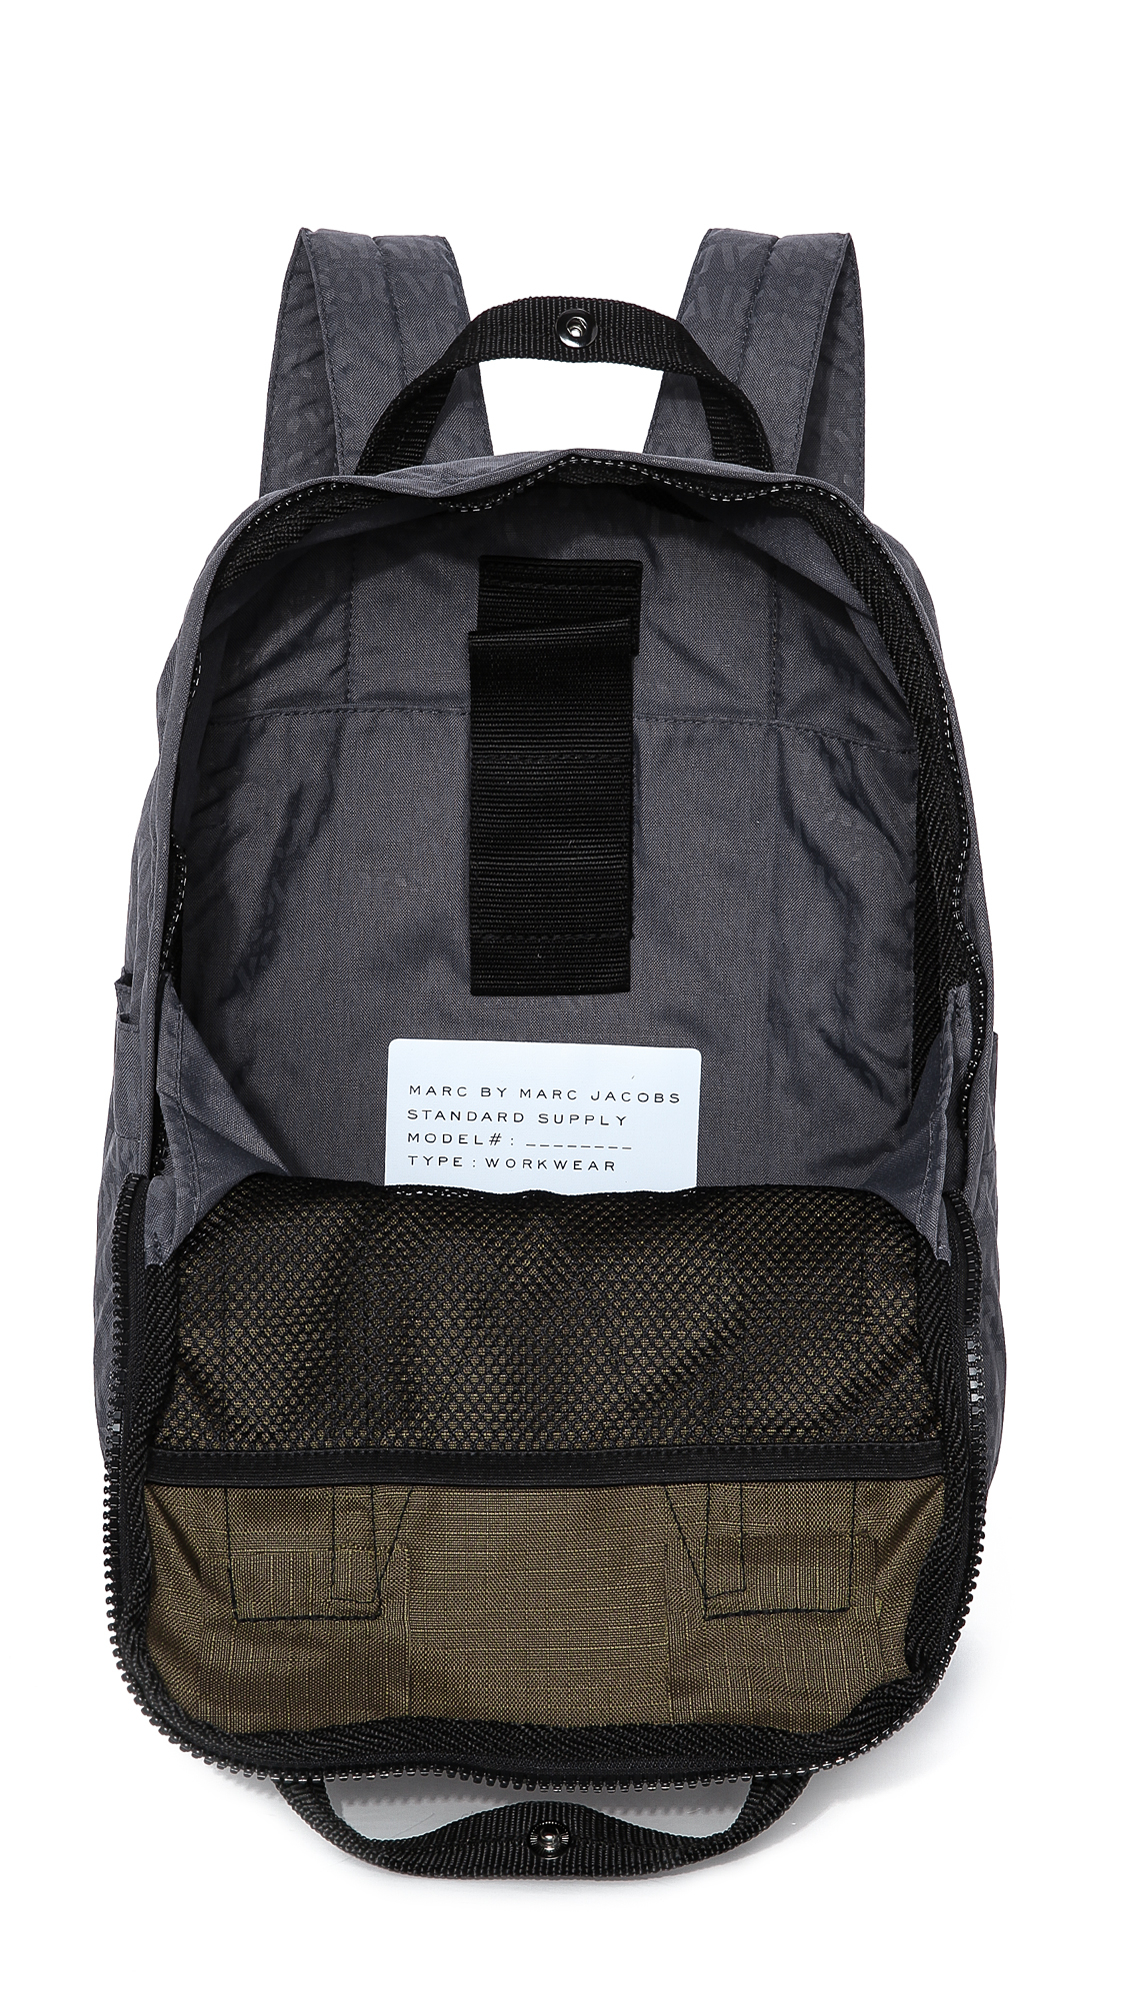 Marc By Marc Jacobs M Standard Supply Nylon Backpack for Men - Lyst